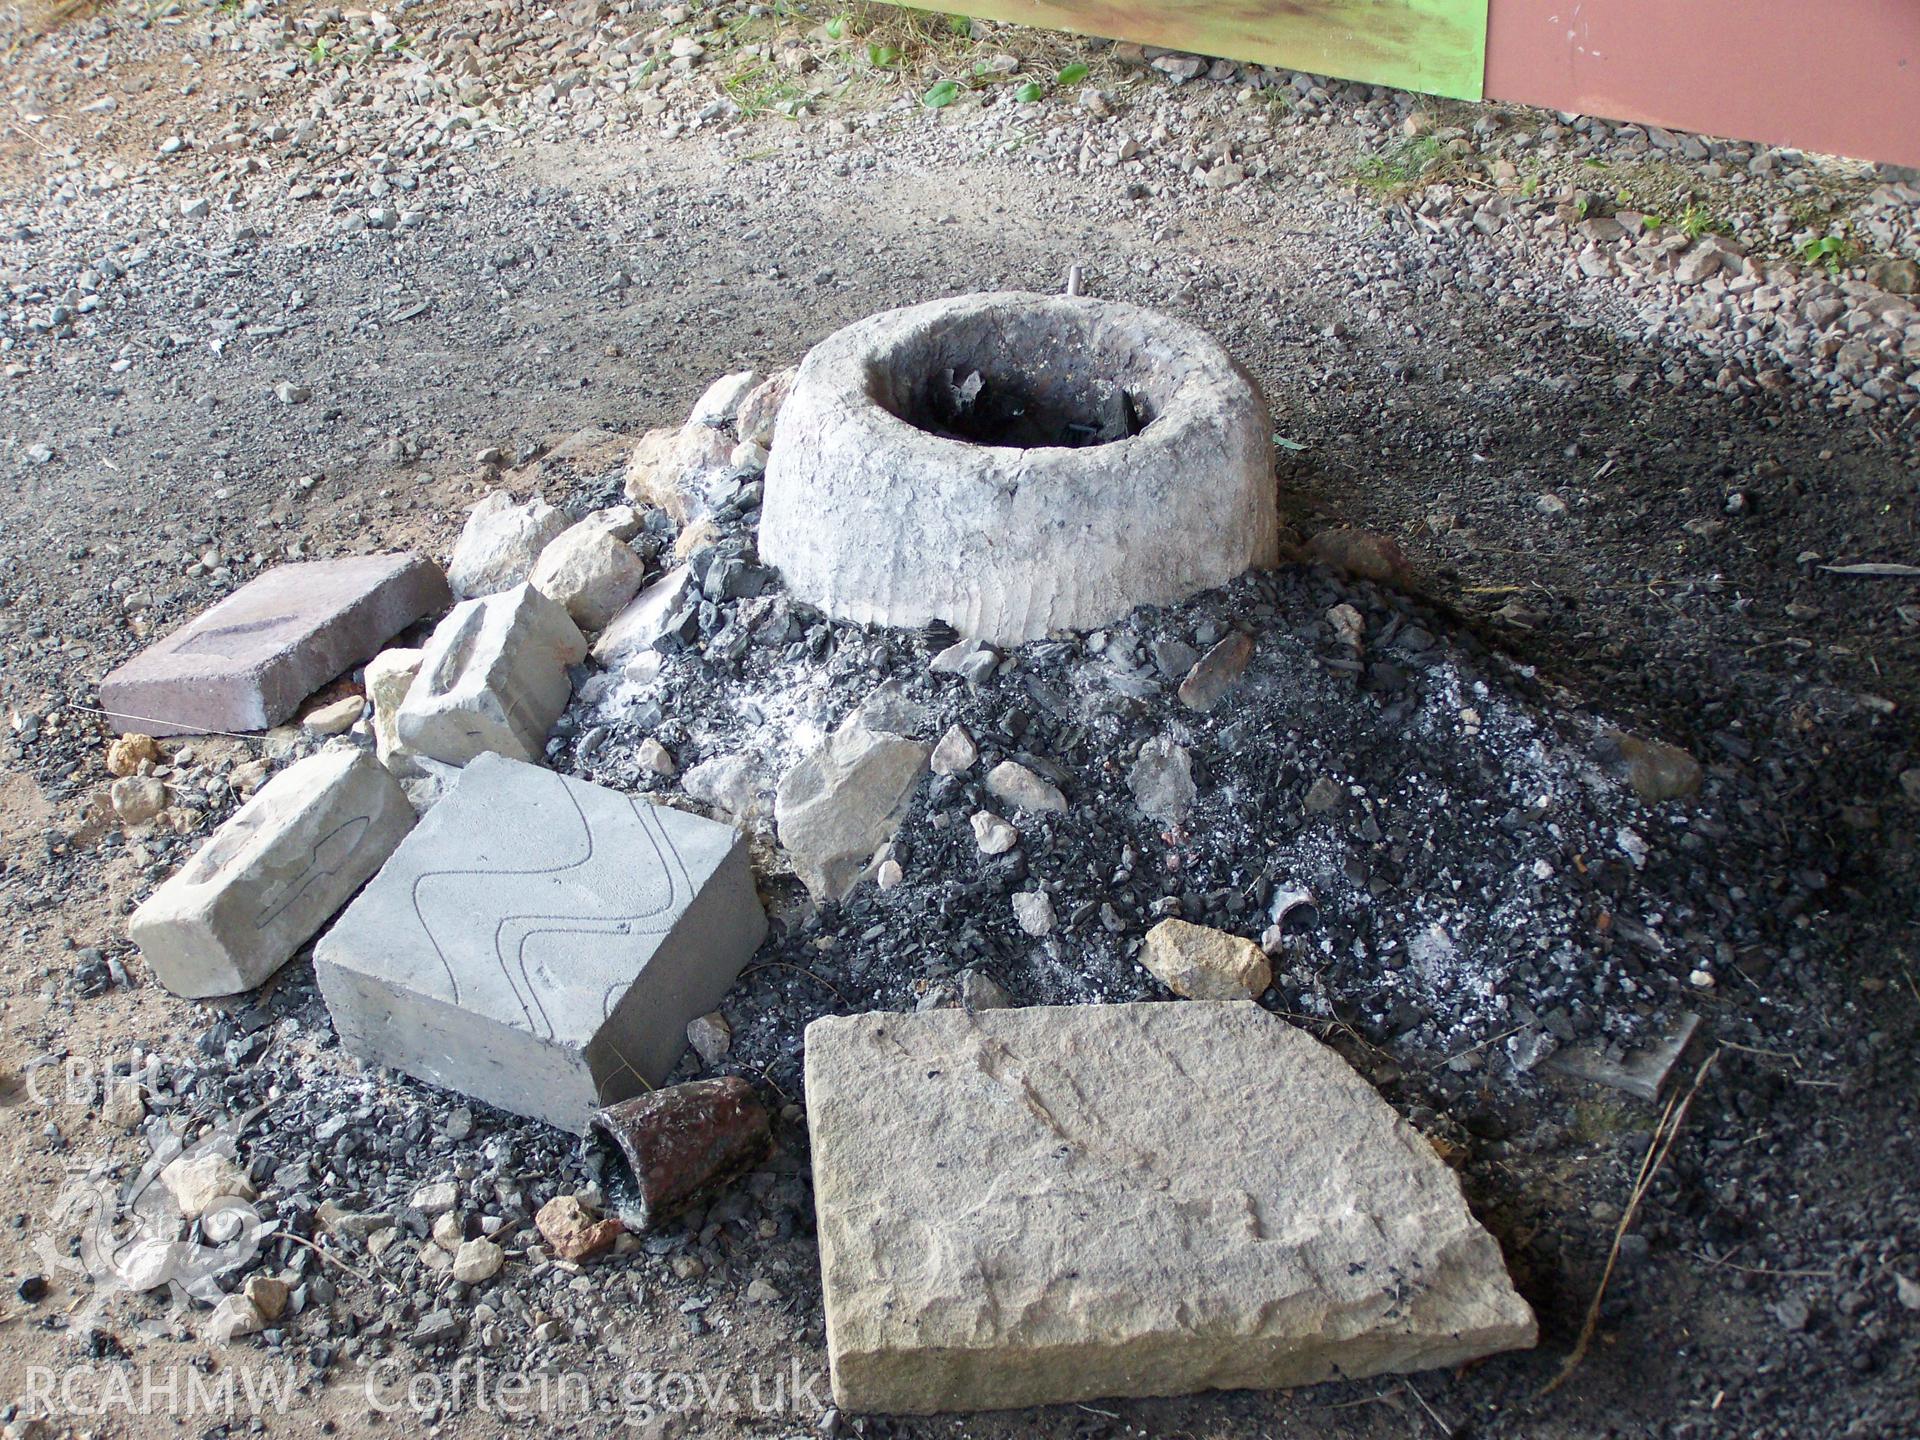 Smelting process recreated for visitors